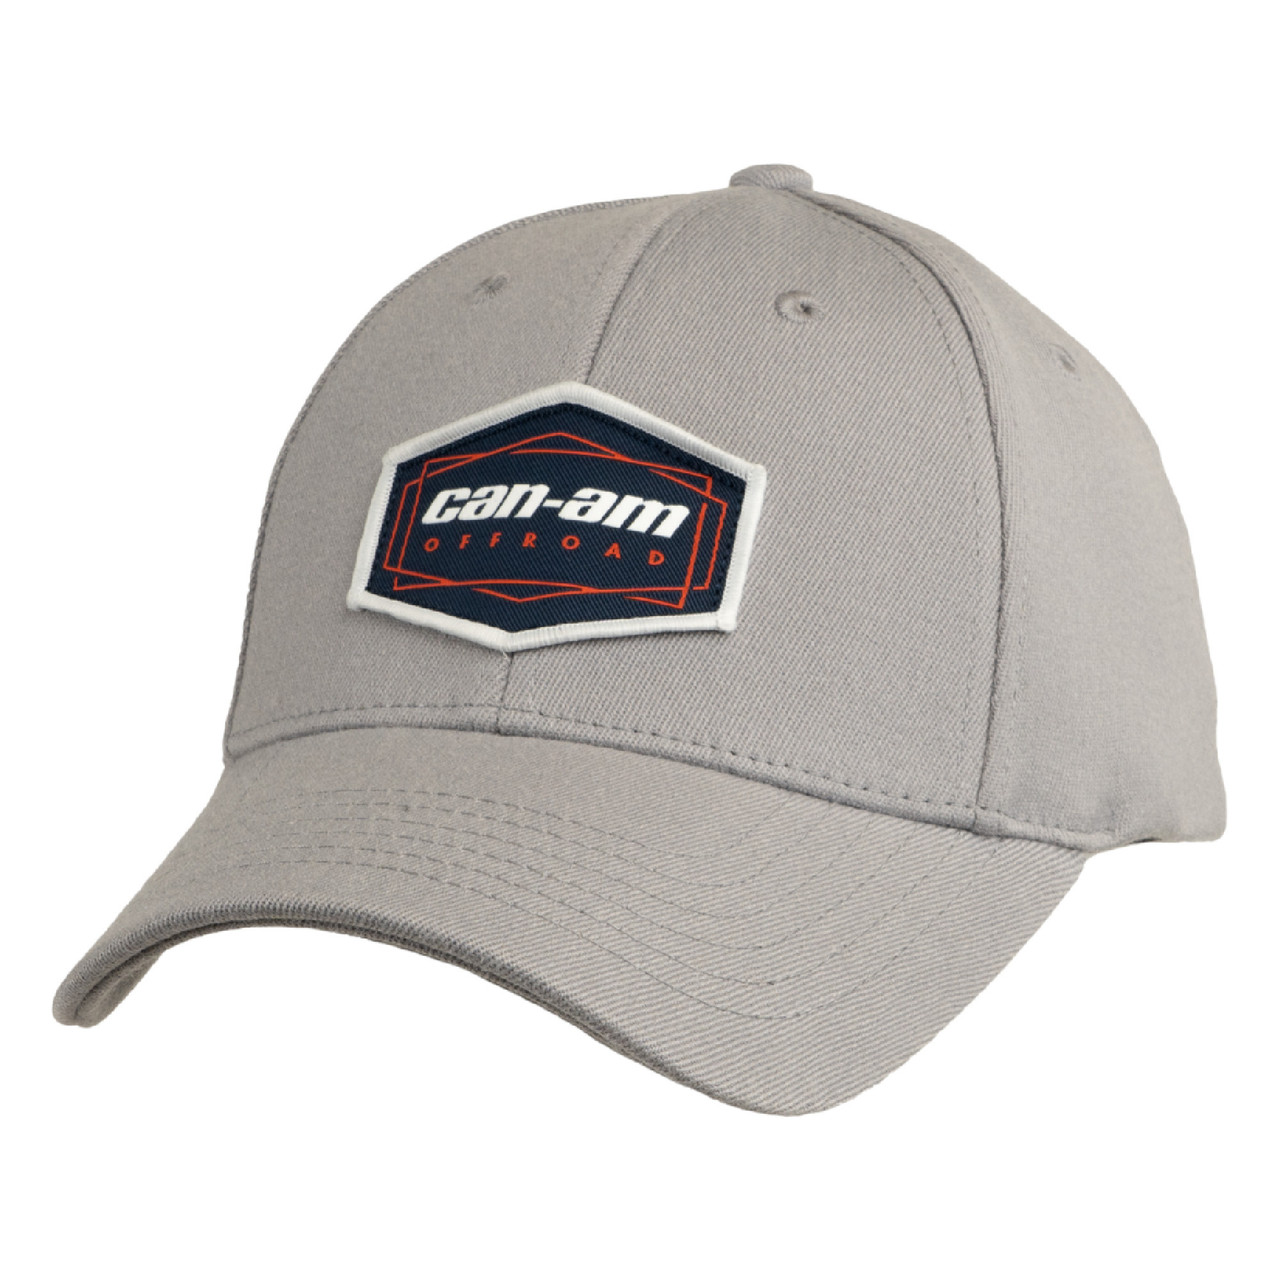 Can-Am New OEM, Men's 2XL Branded Peaked Can-Am Fitted ESTD Cap, 4547731415